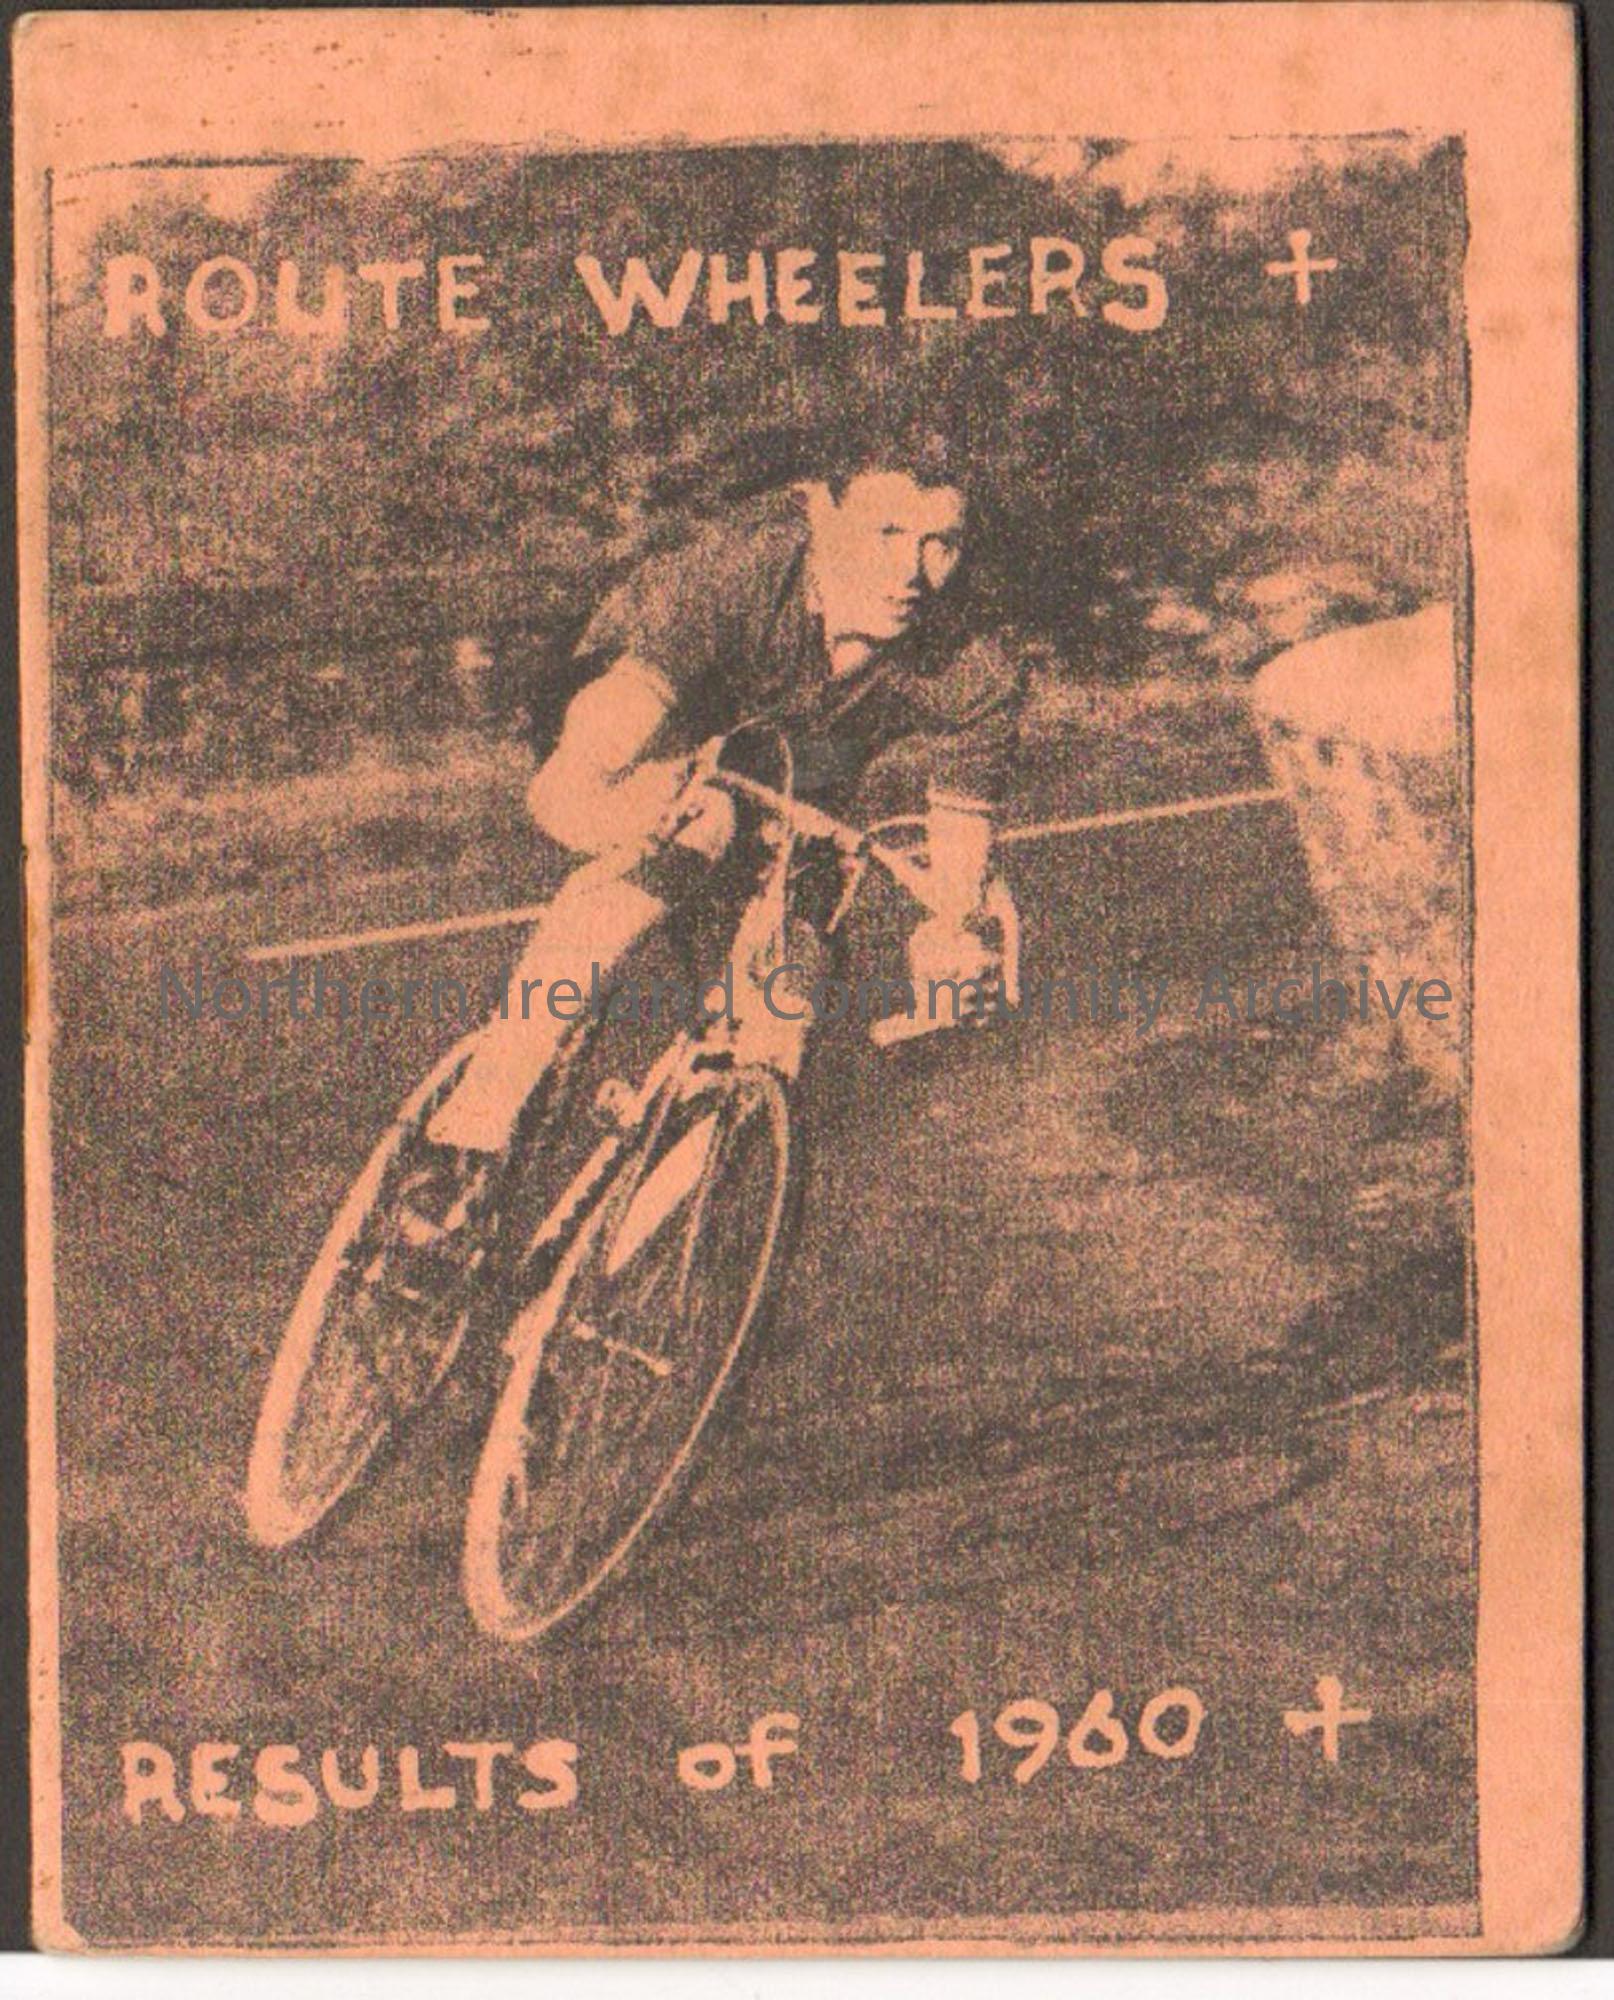 Route Wheelers Results of 1960. Orange booklet with black and white photograph of road cyclist on the front.